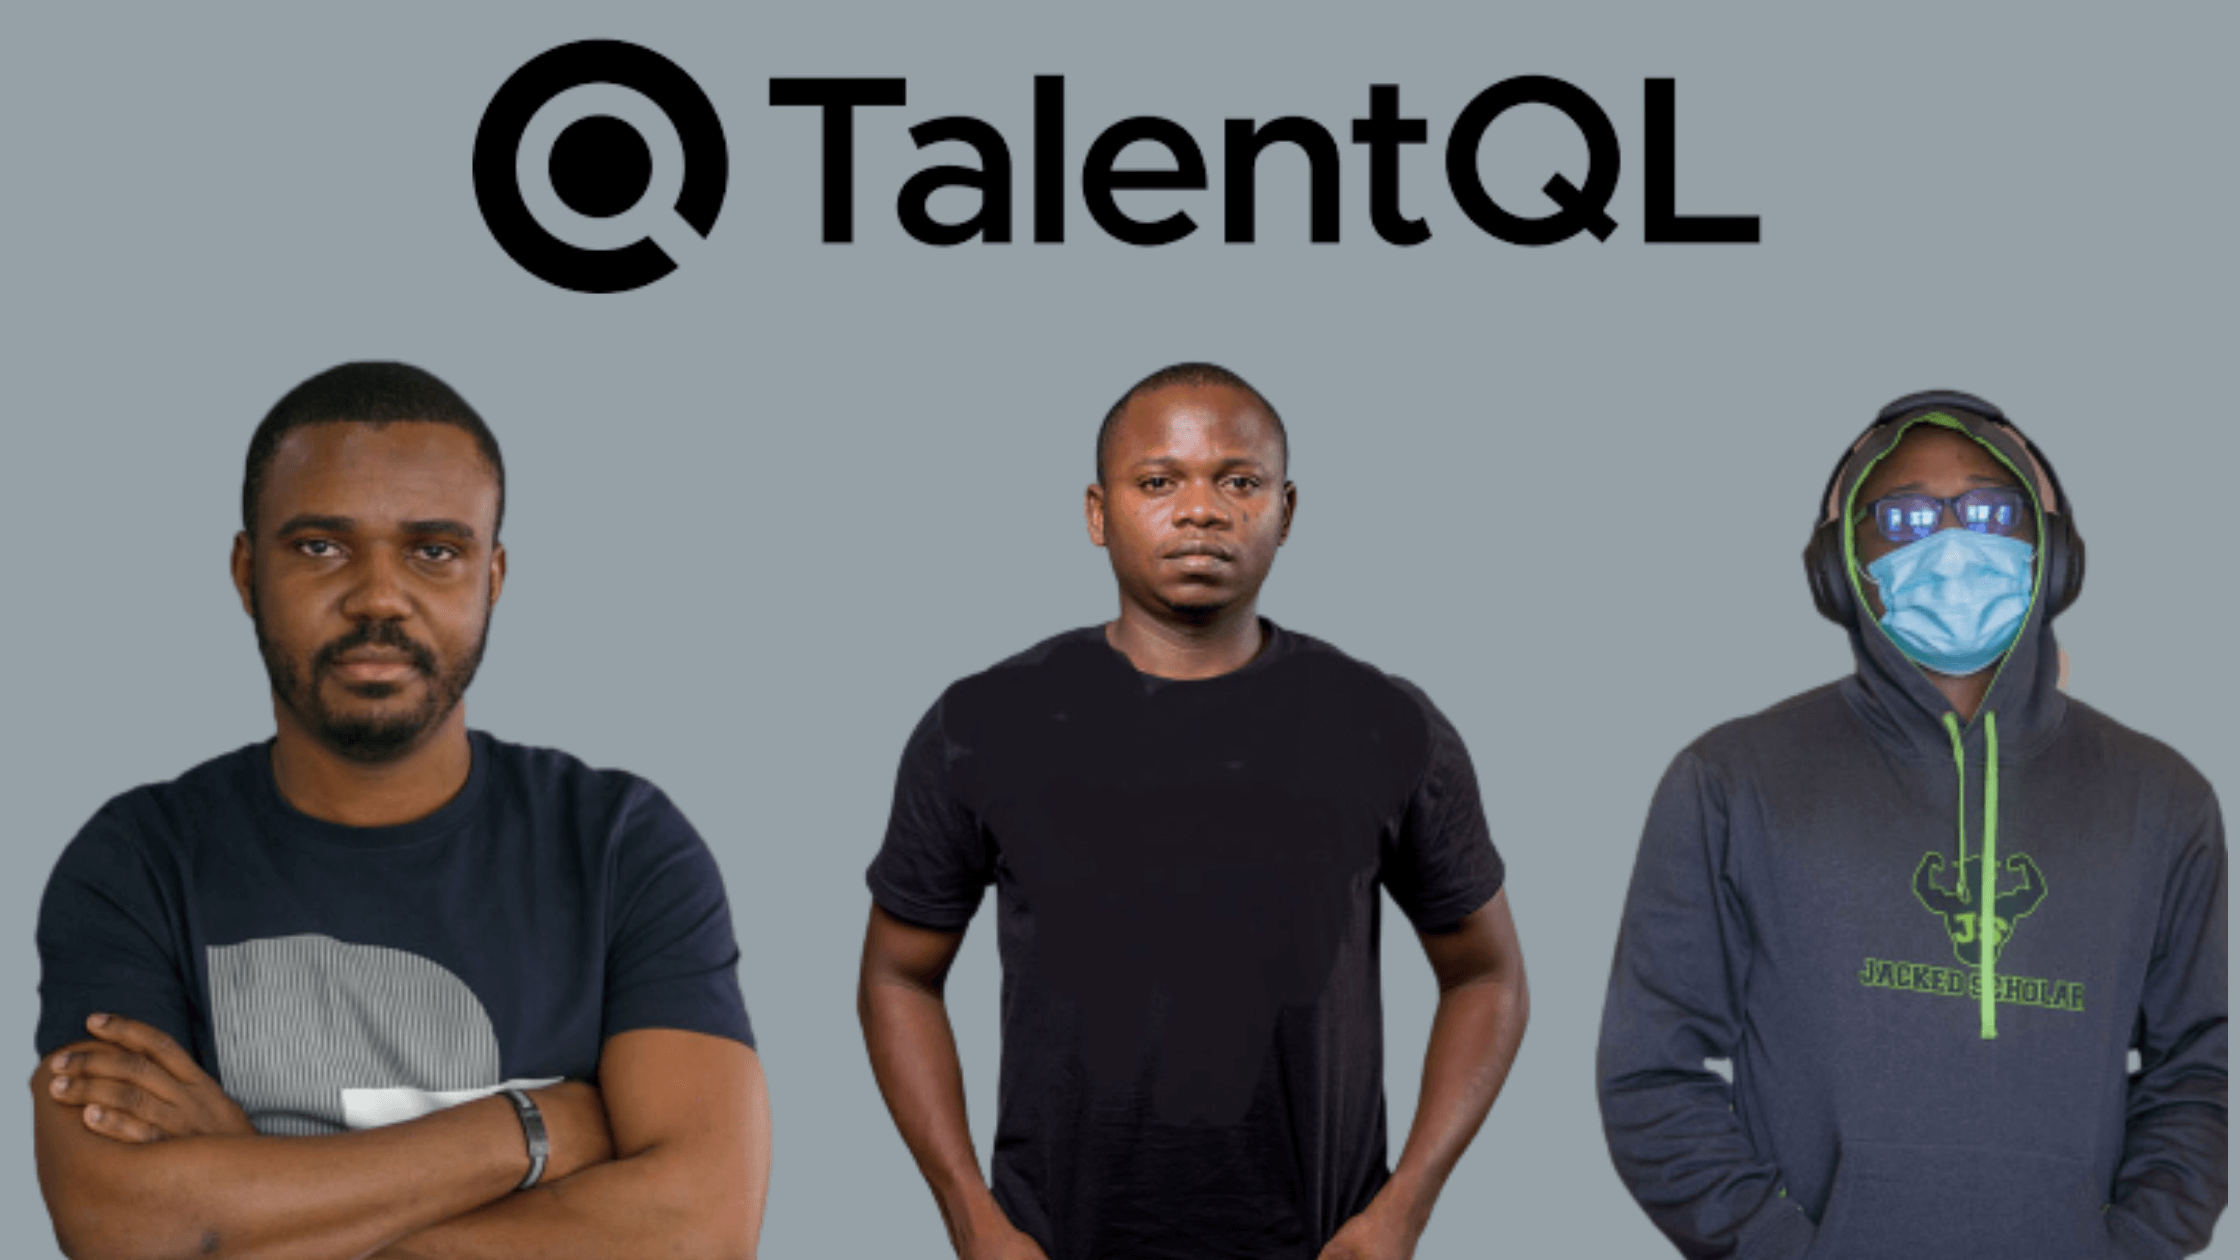 TalentQL raises $300,000 in a pre-seed round led by Zedcrest Capital